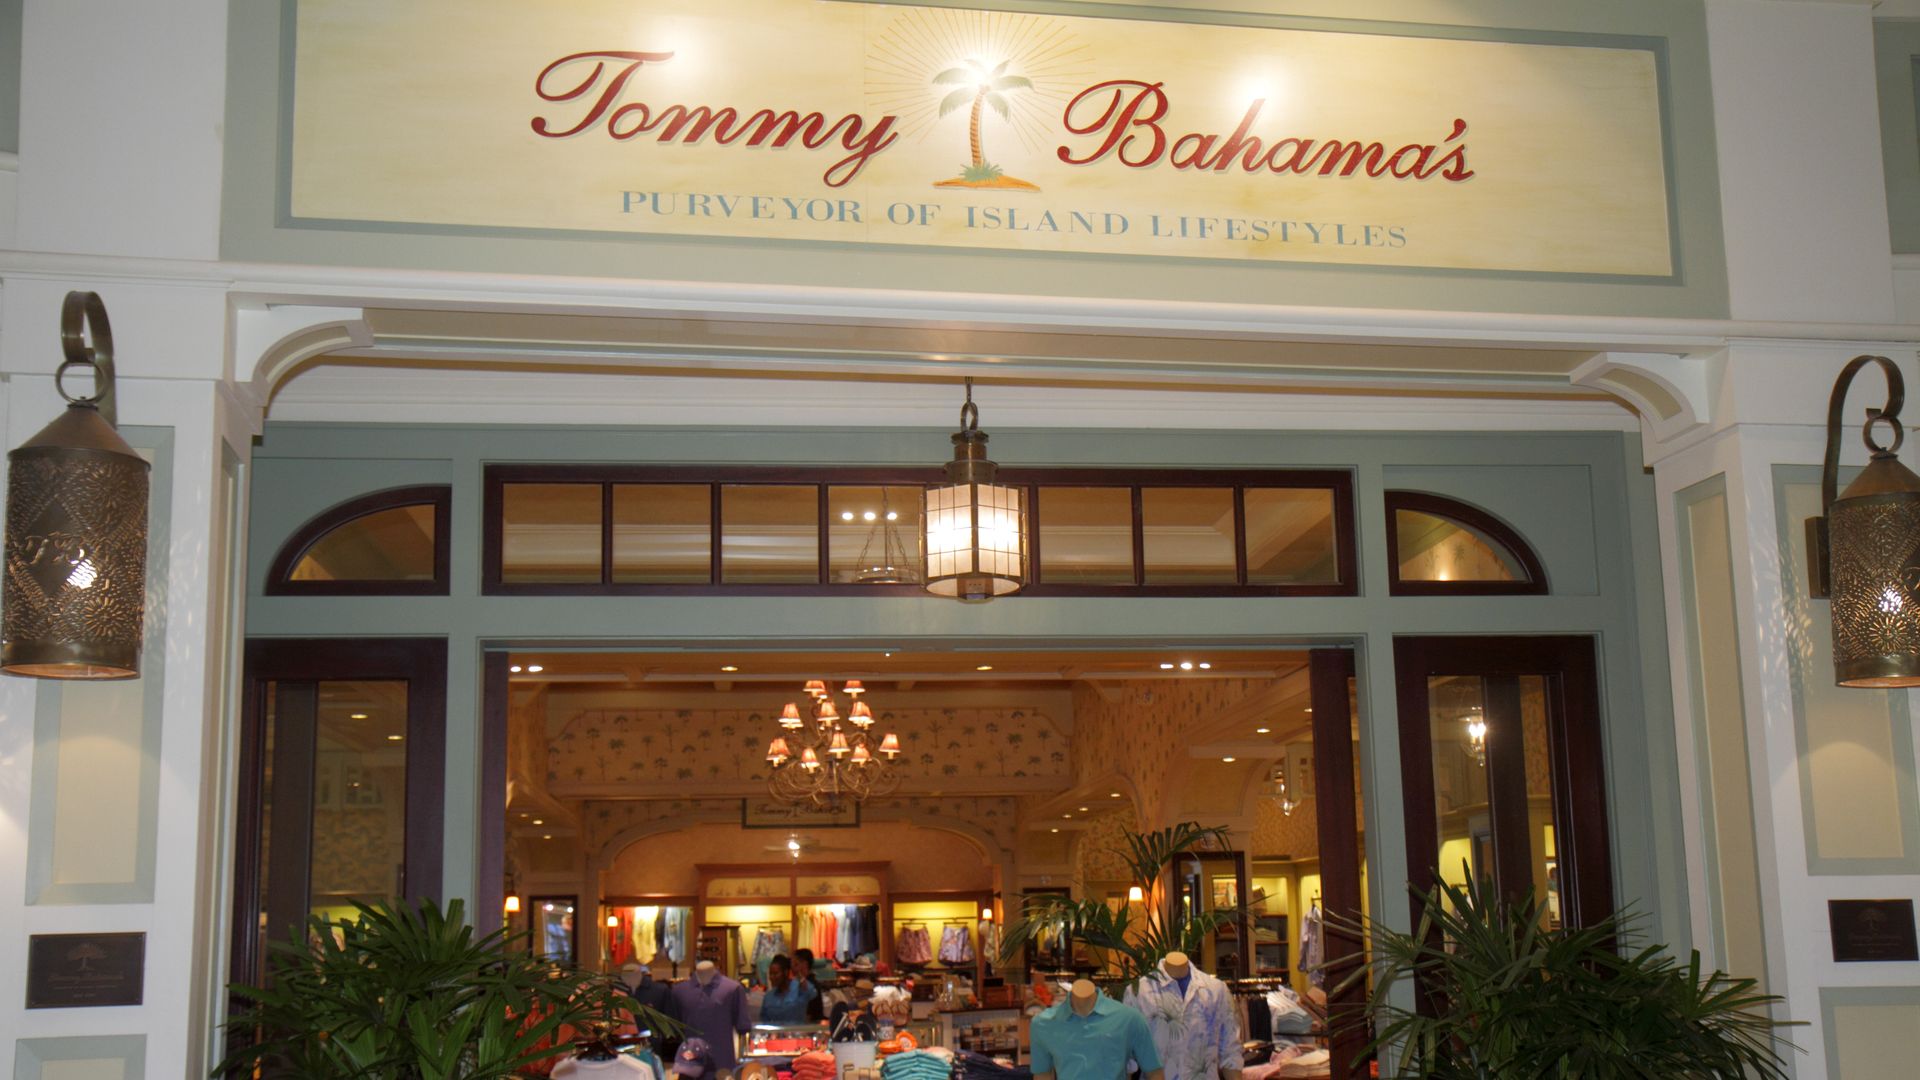 A store front for the apparel brand Tommy Bahama. 